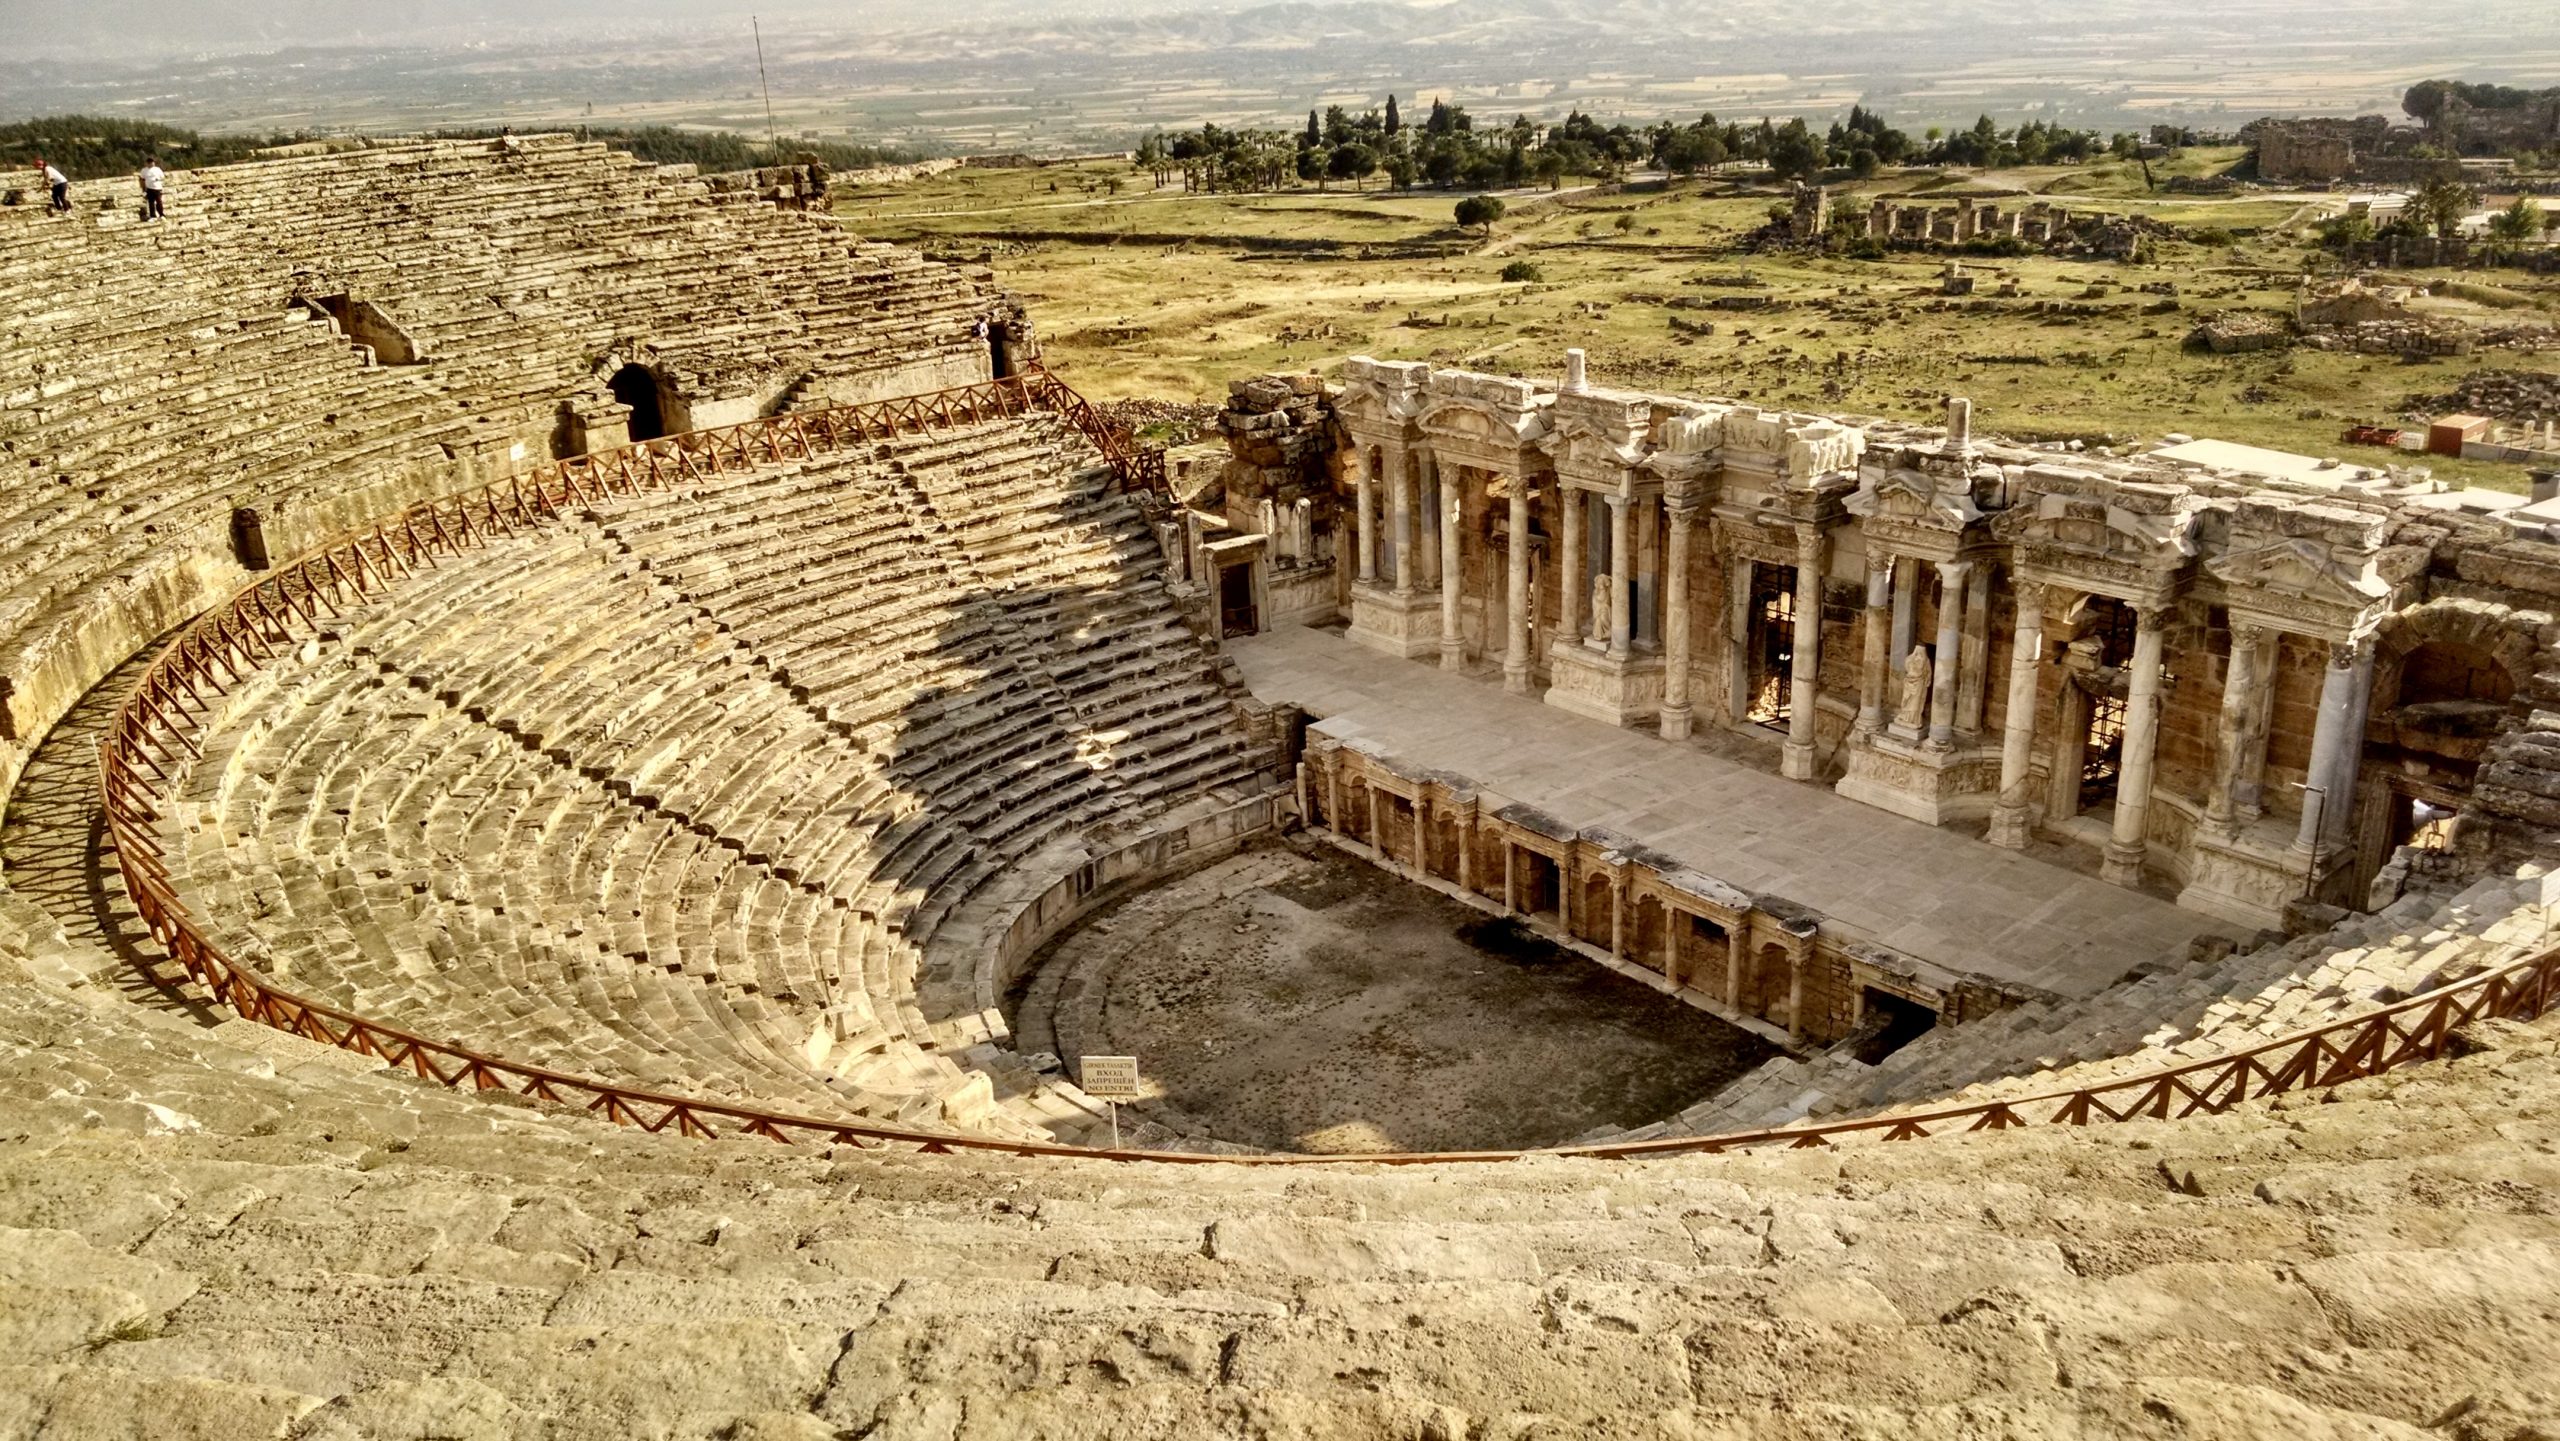 The theatre at Hierapolis in Pamukkale, Denizli, Turkey, picture taken from upper seats. Amphitheatre style, well-preserved stone theatre. Two large sections of semi-circular stone benches (45 rows in total) descending down a steep slope to a semi-circular orchestra at ground level. Ornate, small stone columns and niches in front of a raised, rectangular stone stage. The scaenae frons behind the stage is made up of ten ornate Corinthian columns, topped with entablature and forming six statuary niches with larger than life sized human figures in them. The surrounding country side behind the skene is flat, with greenish-brown dried grass and a copse of dark green trees off in the distance.